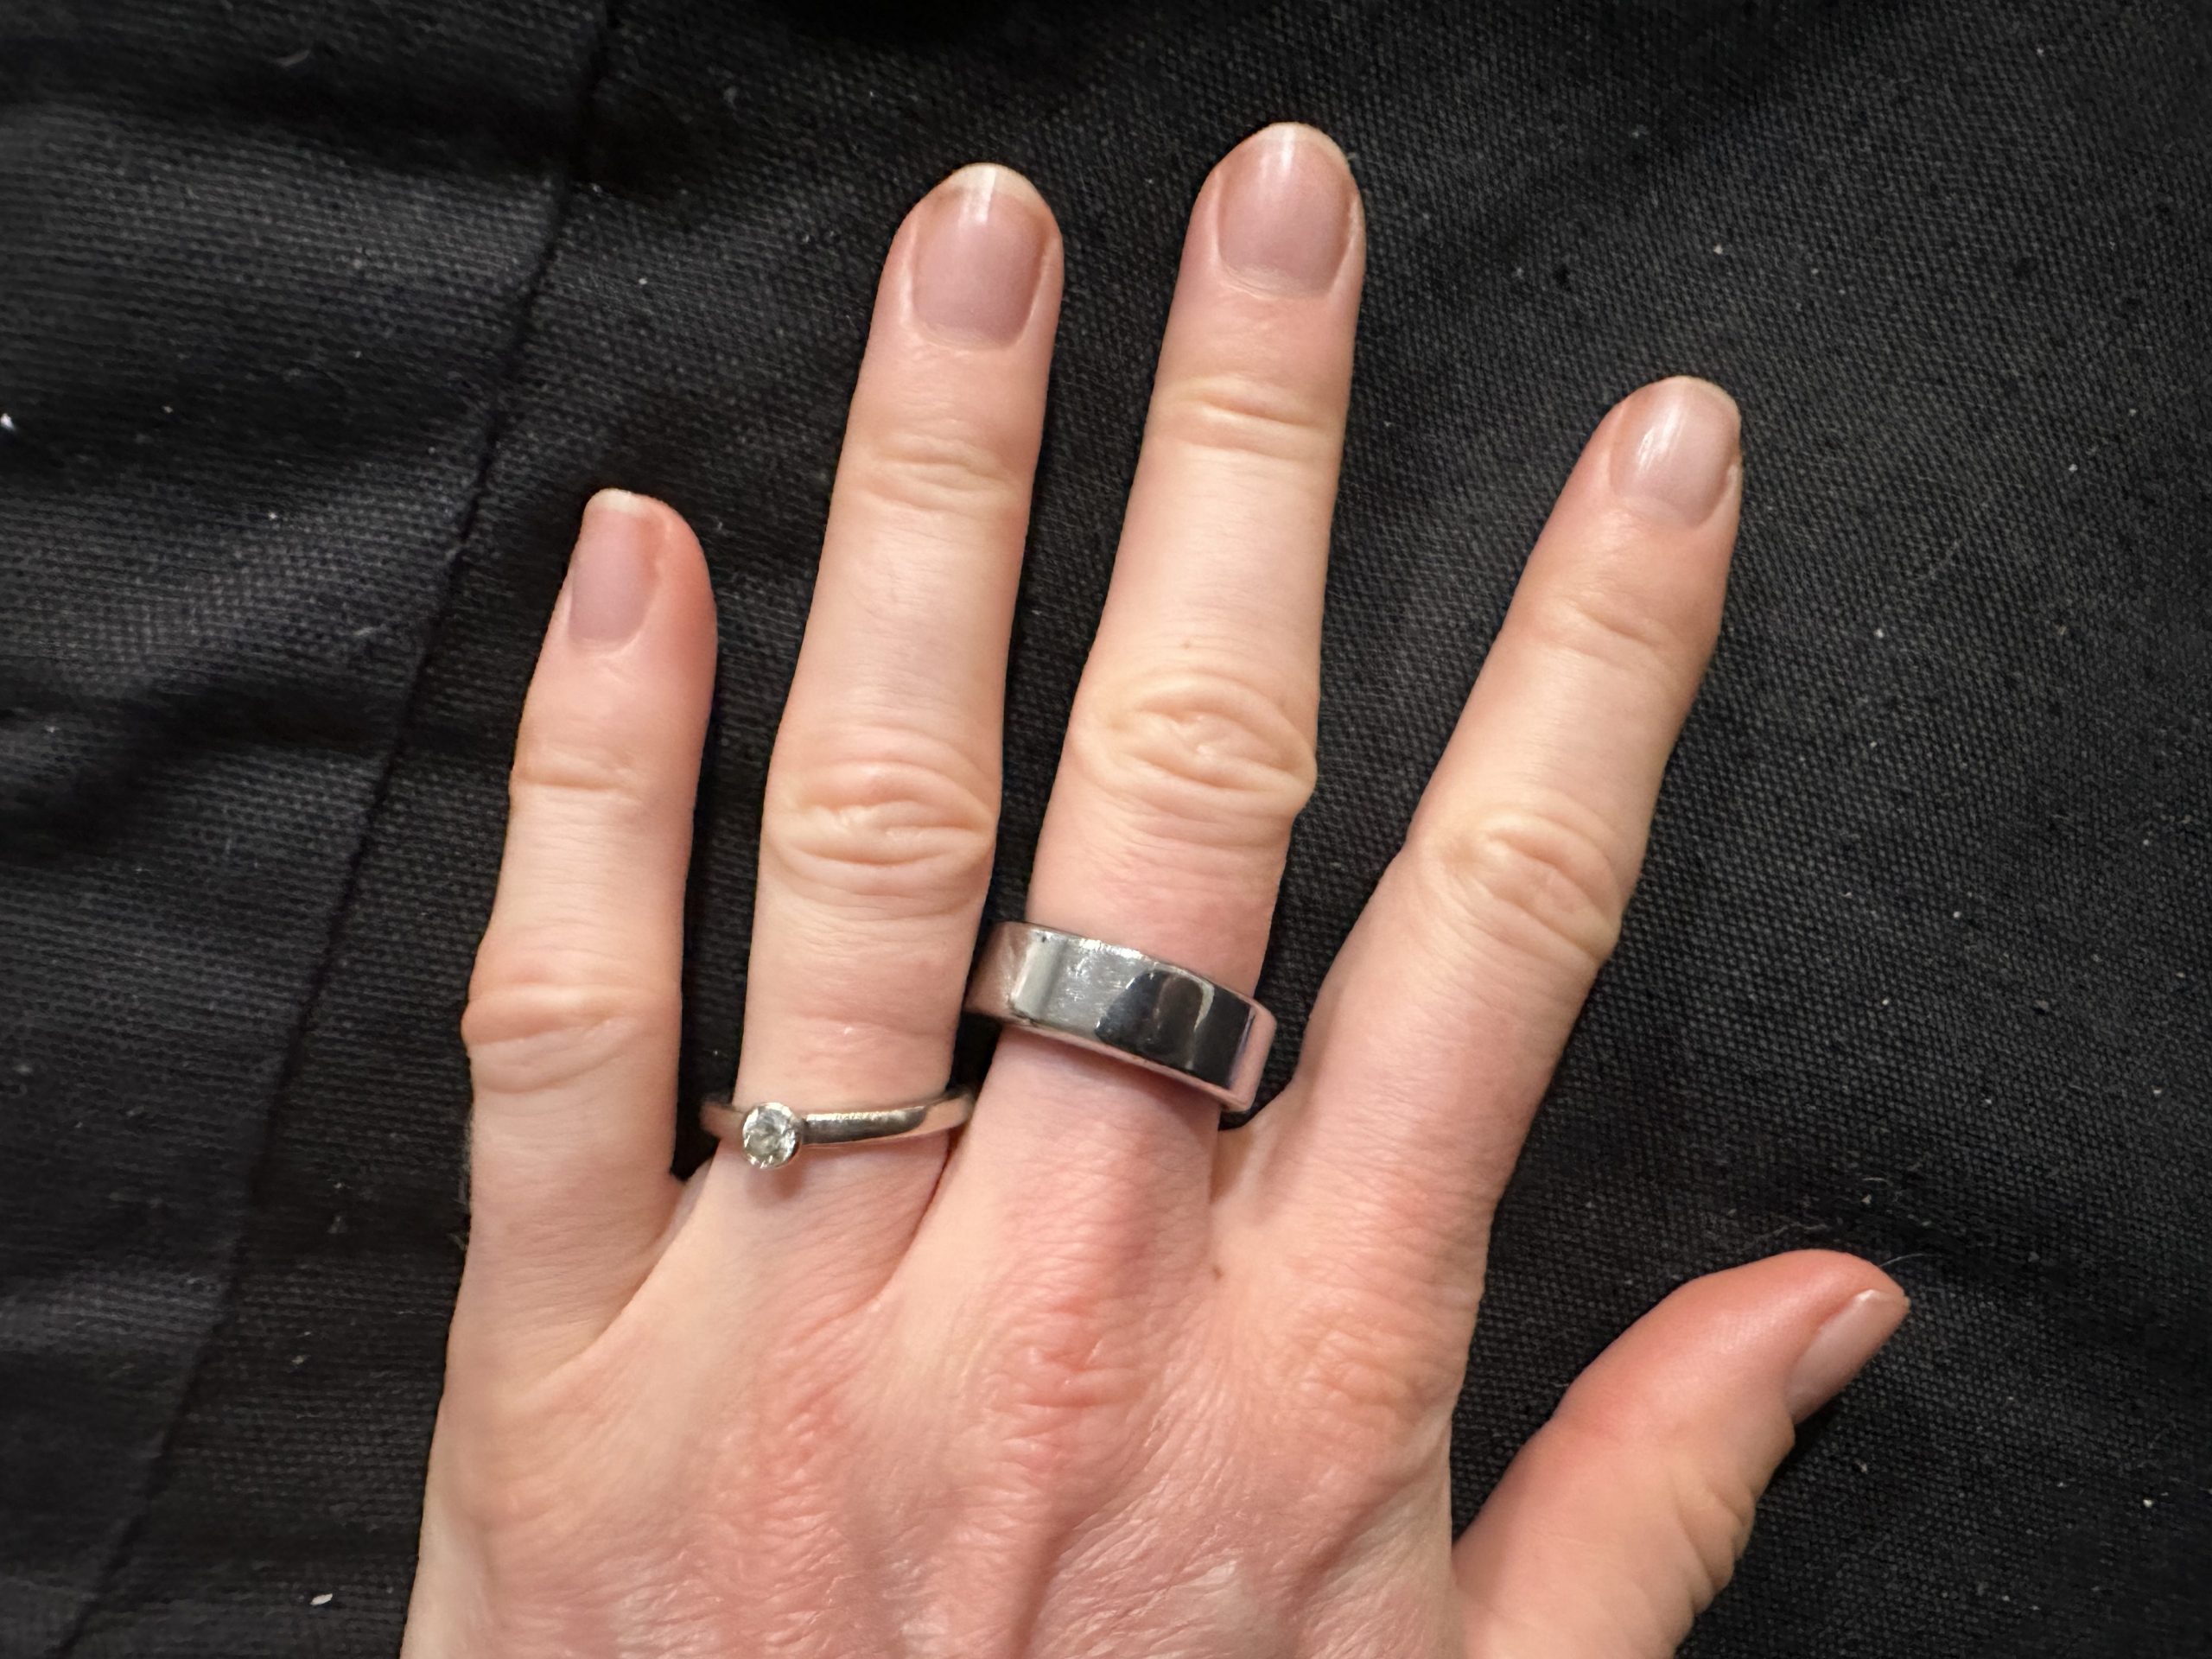 A hand with a light skin tone is shown against a dark fabric background. The hand is wearing two rings: a silver band on the middle finger and a silver ring with a clear stone on the ring finger. The fingernails are short and neatly trimmed.